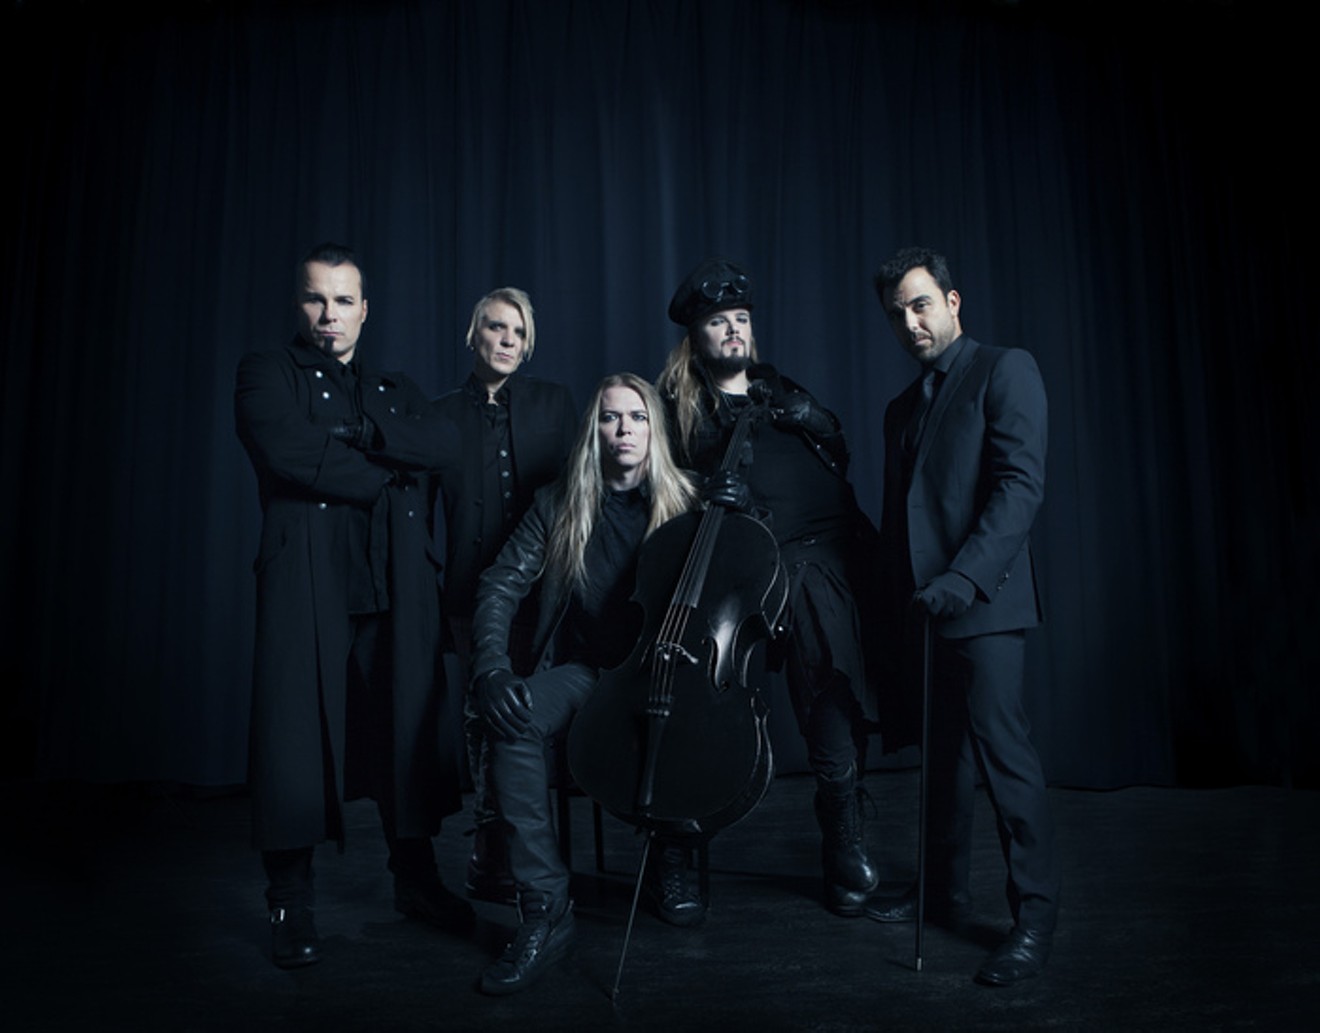 The cello metal group Apocalyptica comprises (from left) cellist Paavo Lötjönen, drummer Mikko Sirén,  cellists Eicca Toppinen and Perttu Kivilaakso and singer Franky Perez. They will play Strauss Square on Wednesday as part of their anniversary tour of their debut album, Plays Metallica By Four Cellos.